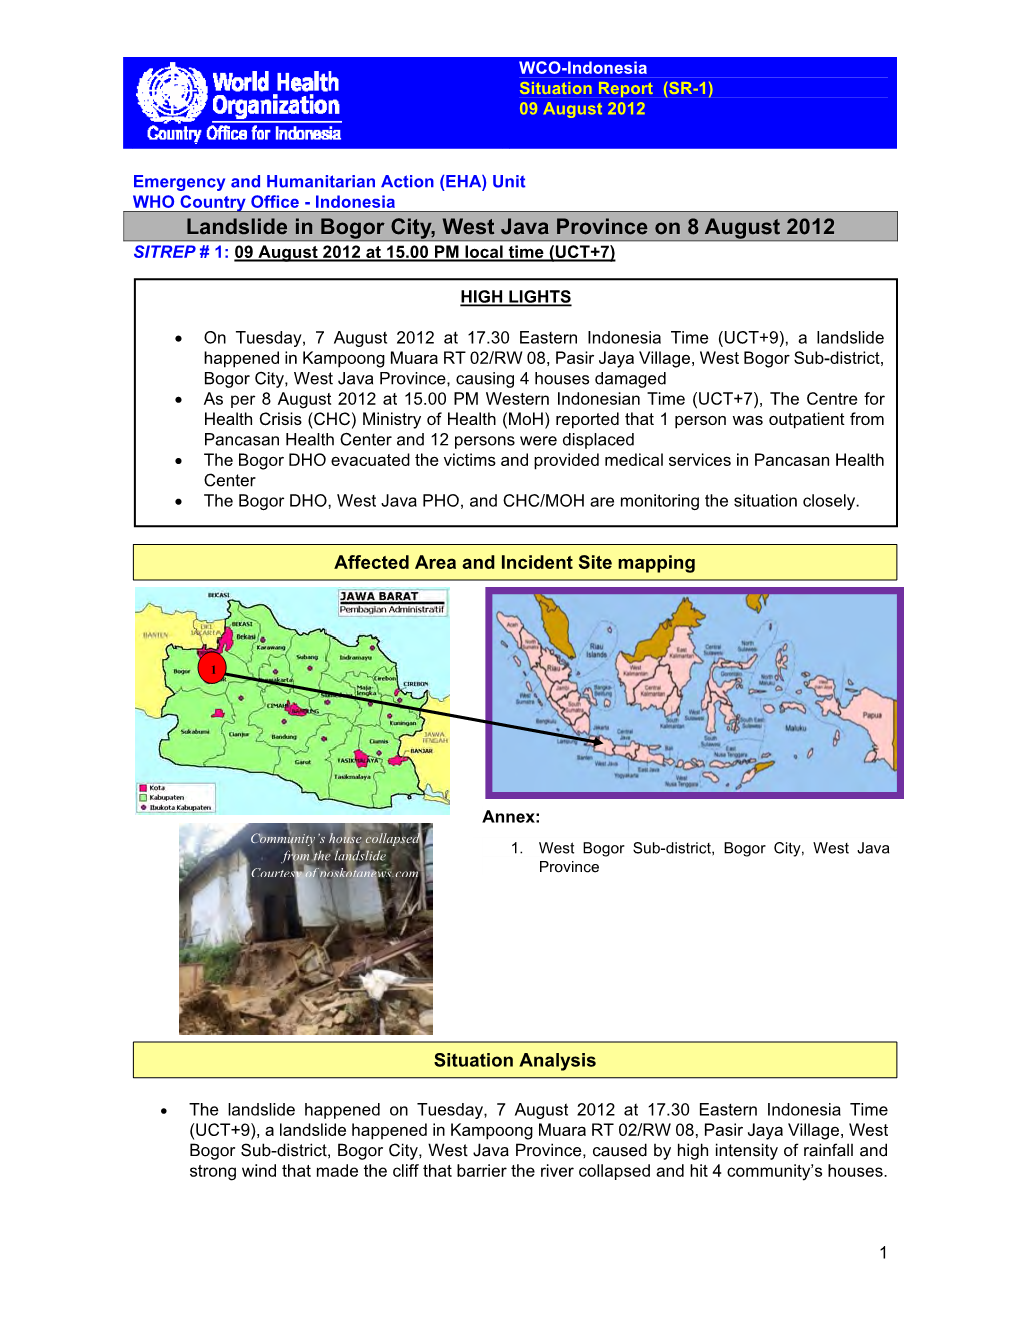 Landslide in Bogor City, West Java Province on 8 August 2012 SITREP # 1: 09 August 2012 at 15.00 PM Local Time (UCT+7)